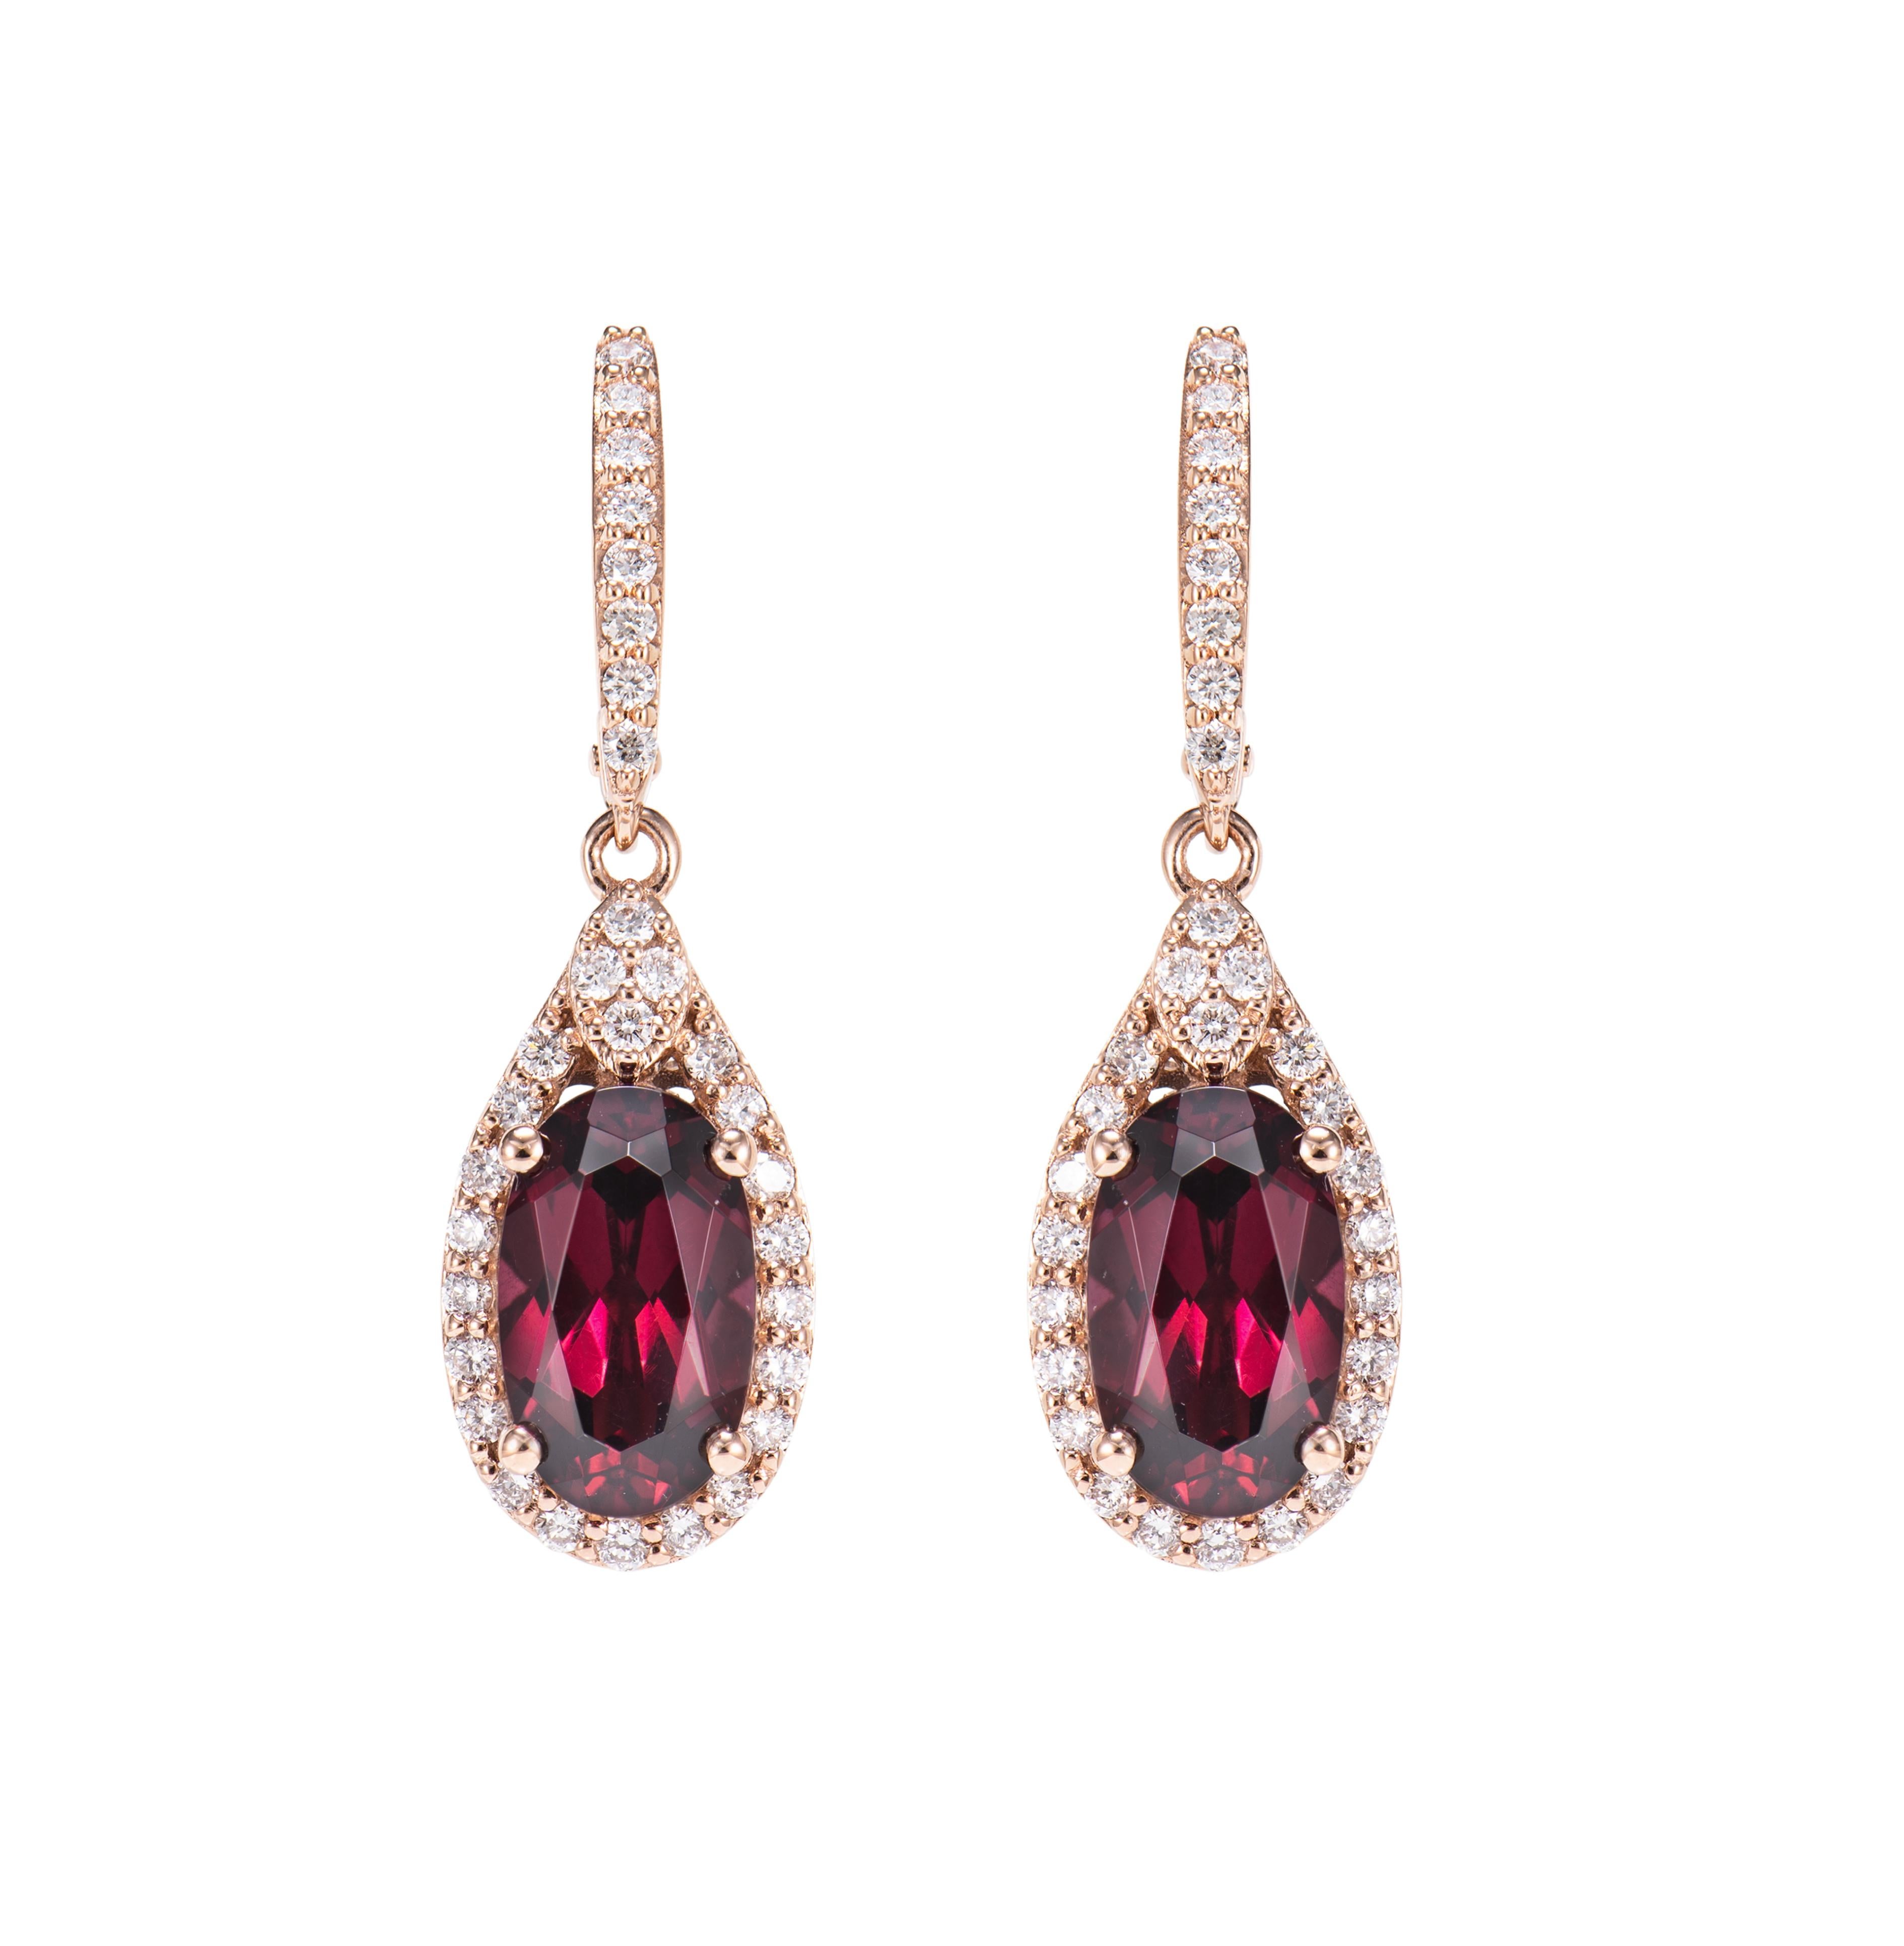 Contemporary 4.96 Carat Rhodolite Drop Earring in 18Karat Rose Gold with White Diamond. For Sale